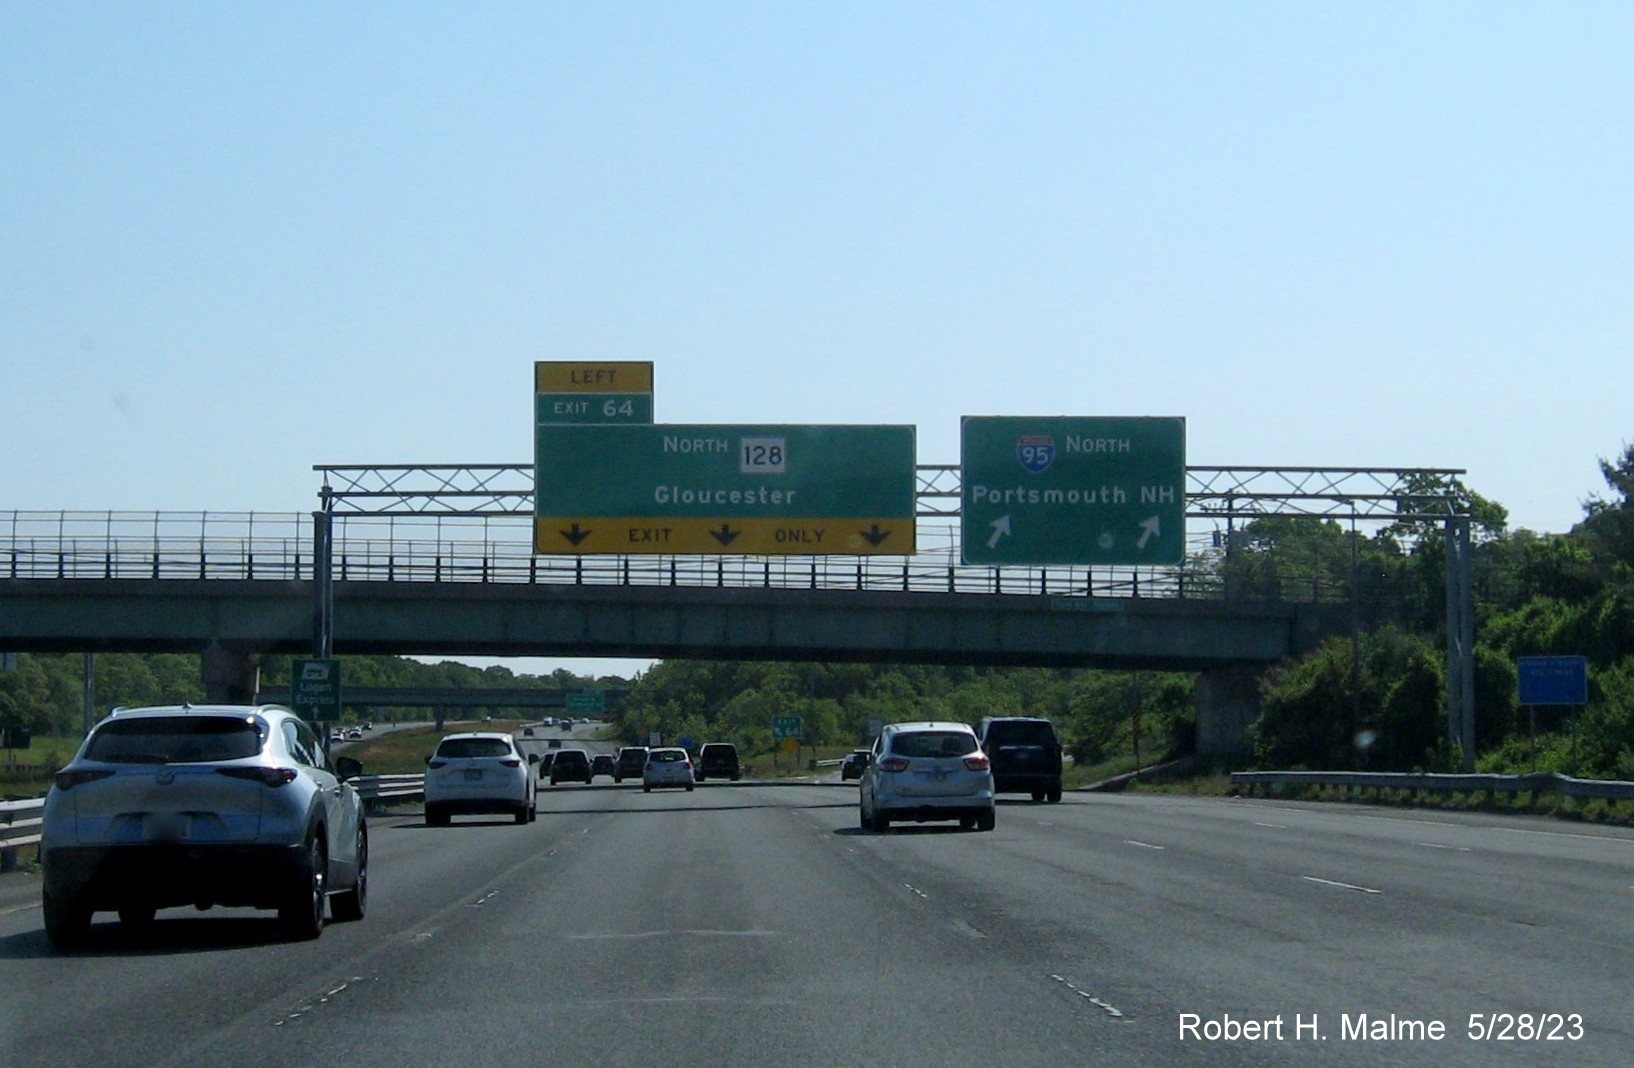 Image of recently replaced 1/2 mile advance diagrammatic sign for MA 128 North exit on I-95 North in Peabody, March 2023